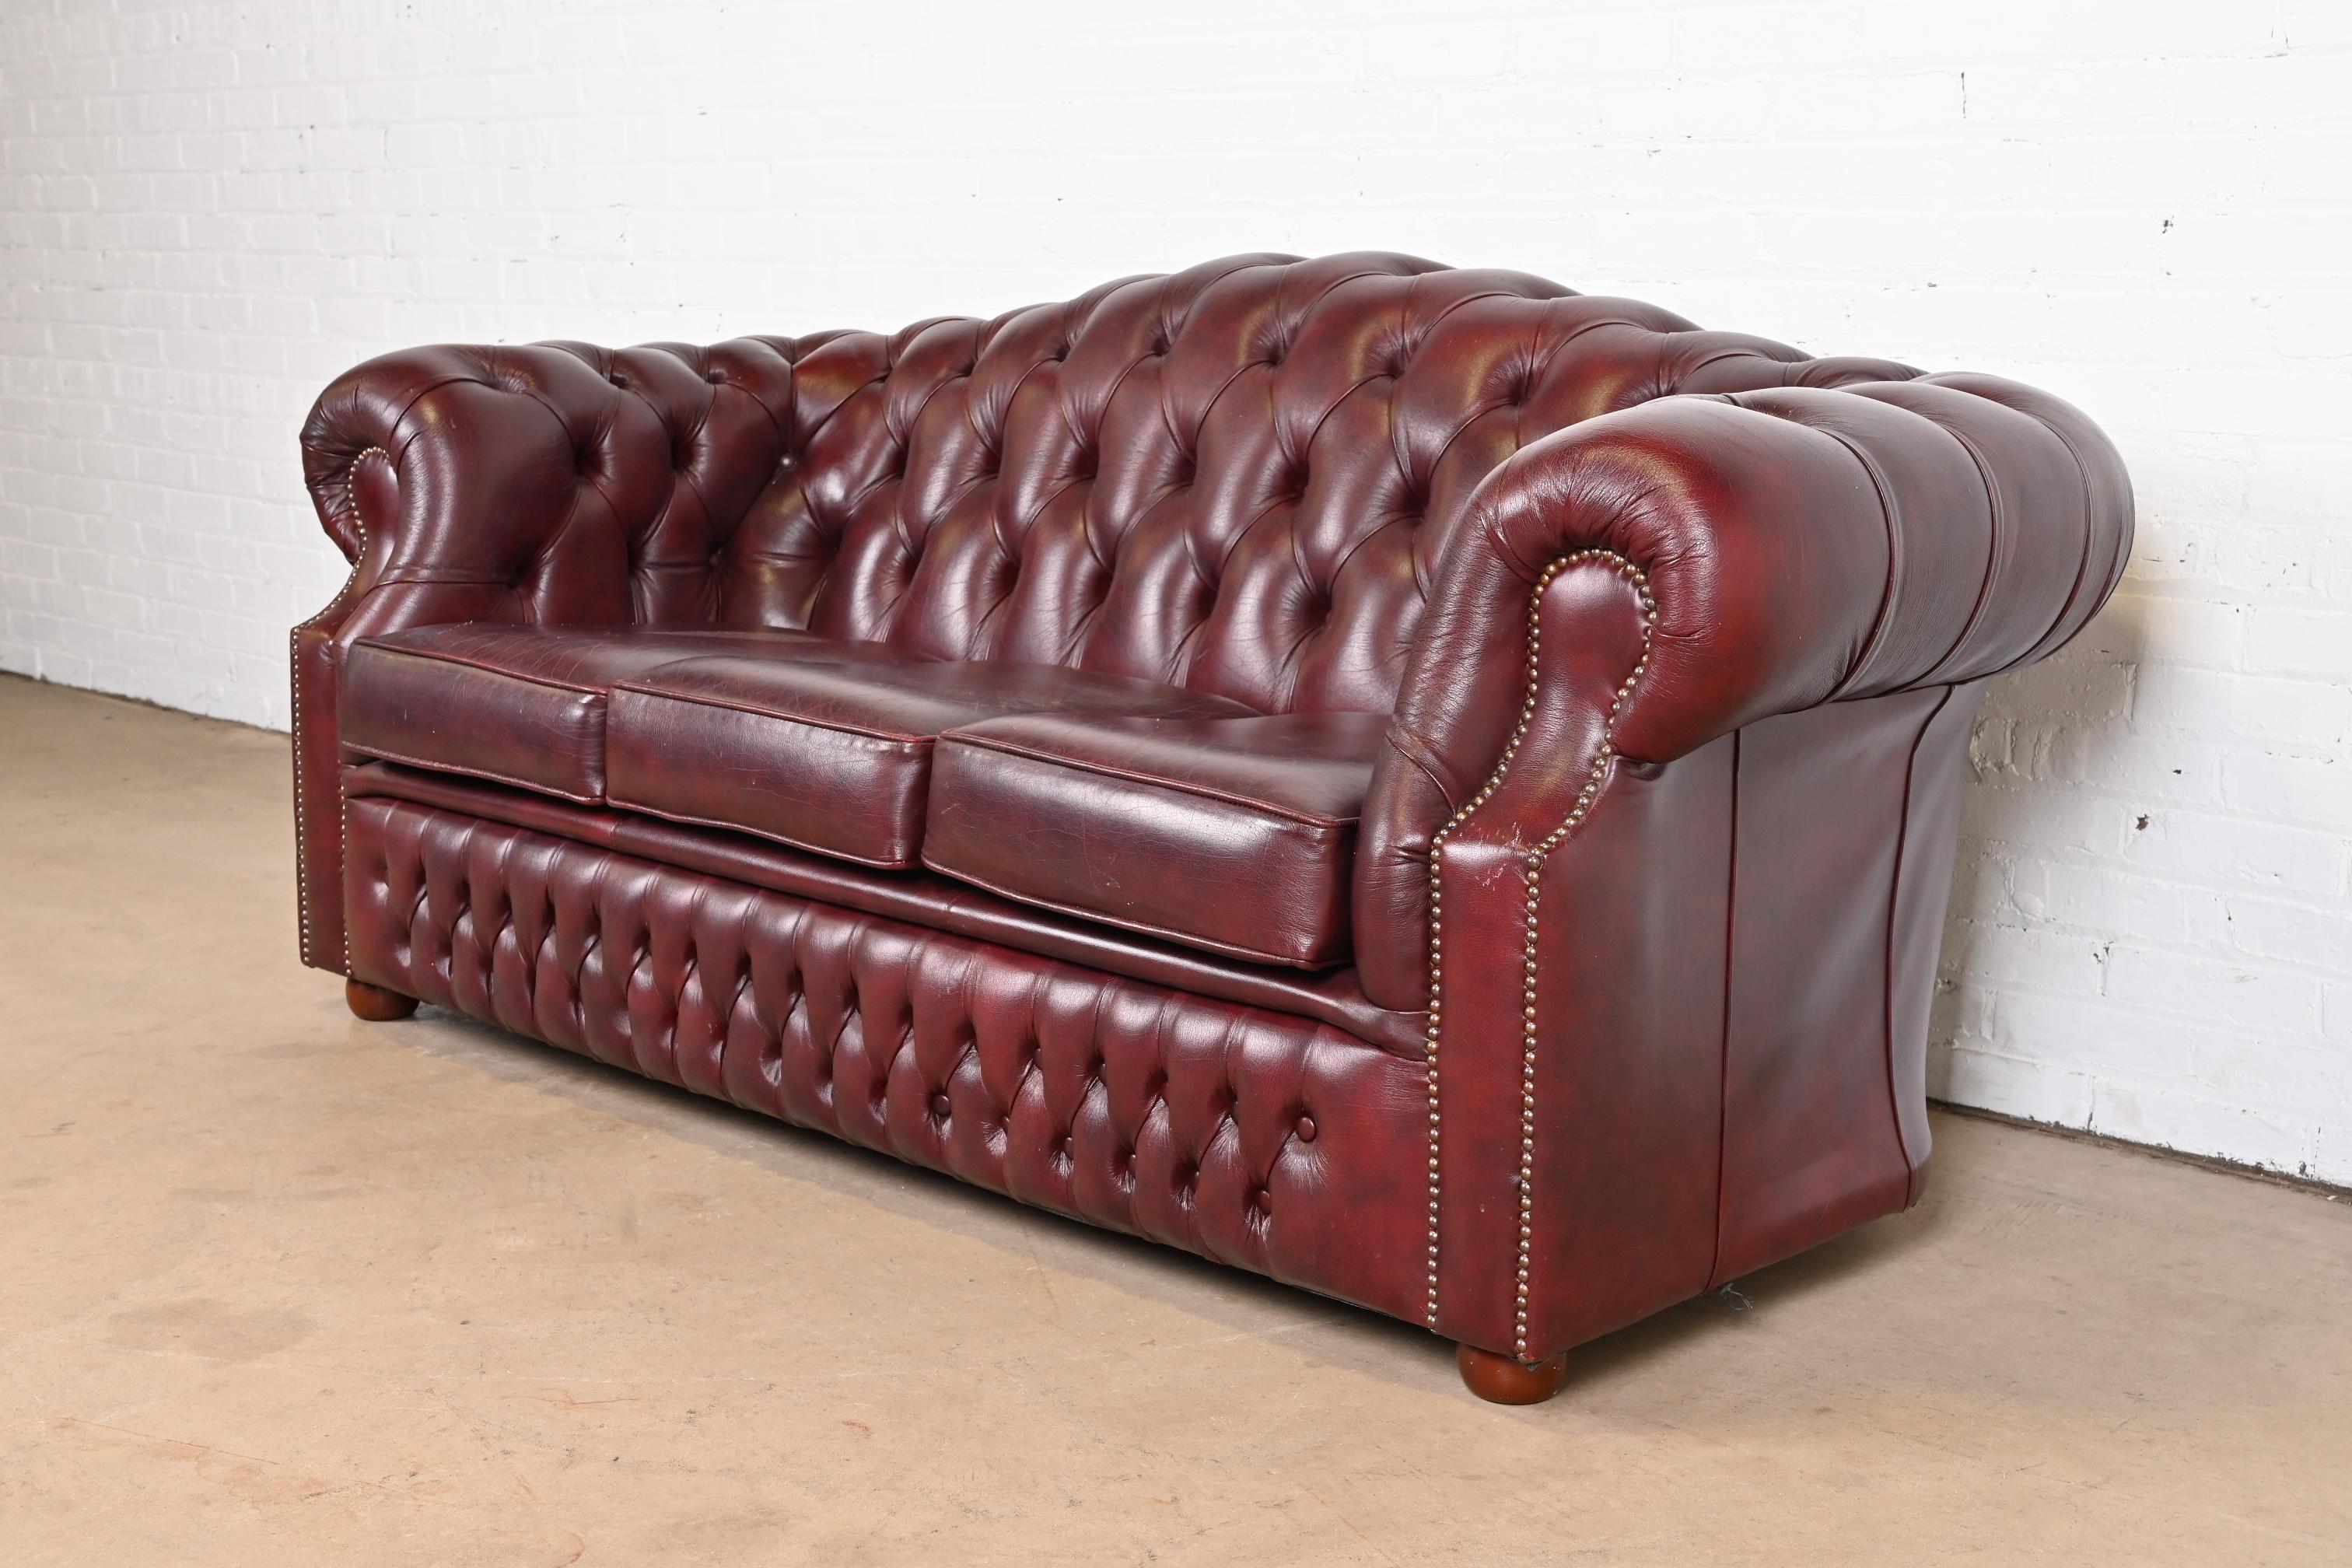 20th Century Vintage English Tufted Oxblood Leather Camelback Chesterfield Sofa